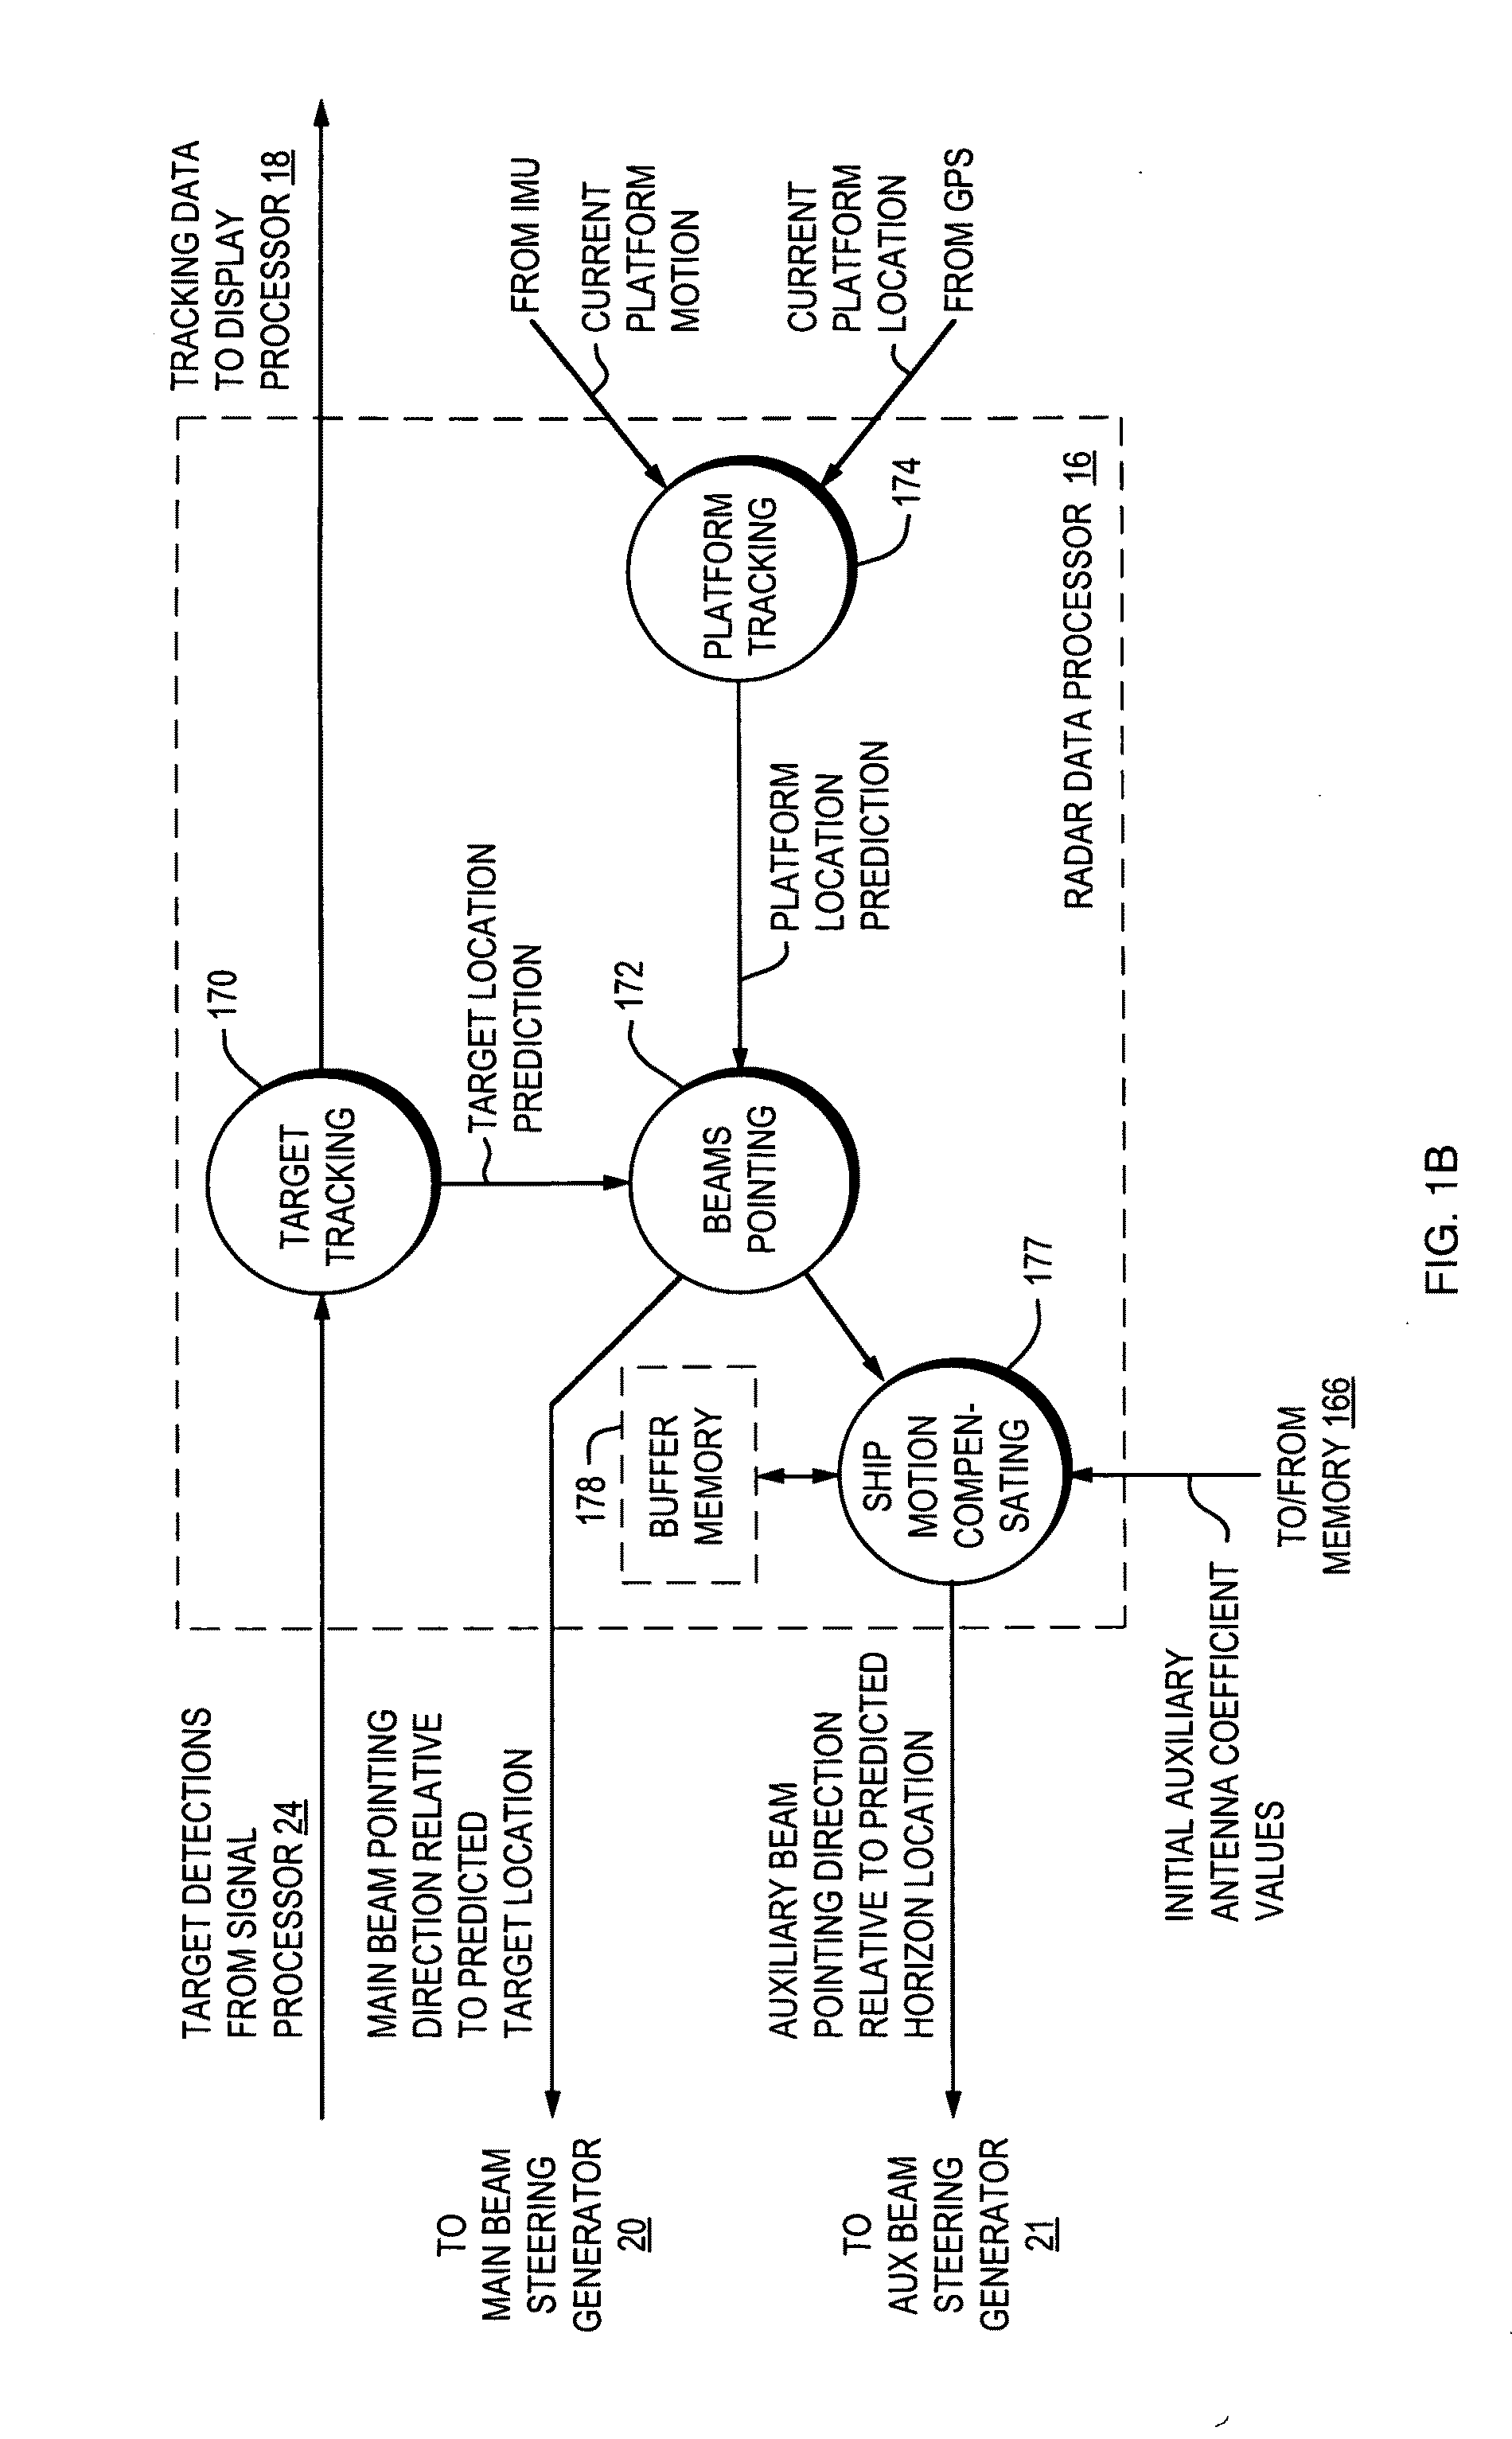 Adaptive sidelobe blanking for motion compensation